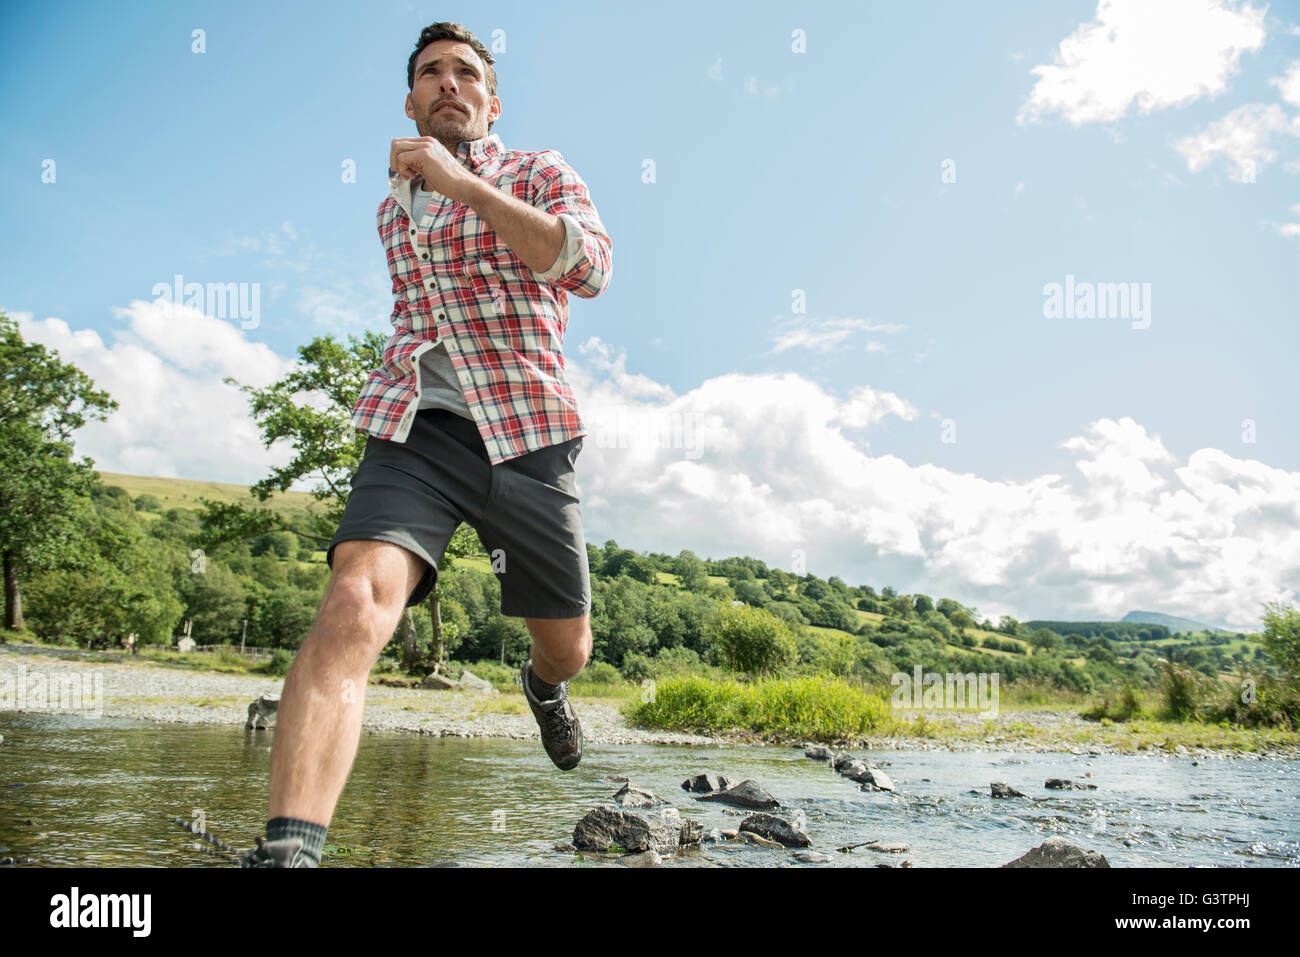 A man in a red check shirt striding across a shallow river near Bala Lake in Wales. Stock Photo